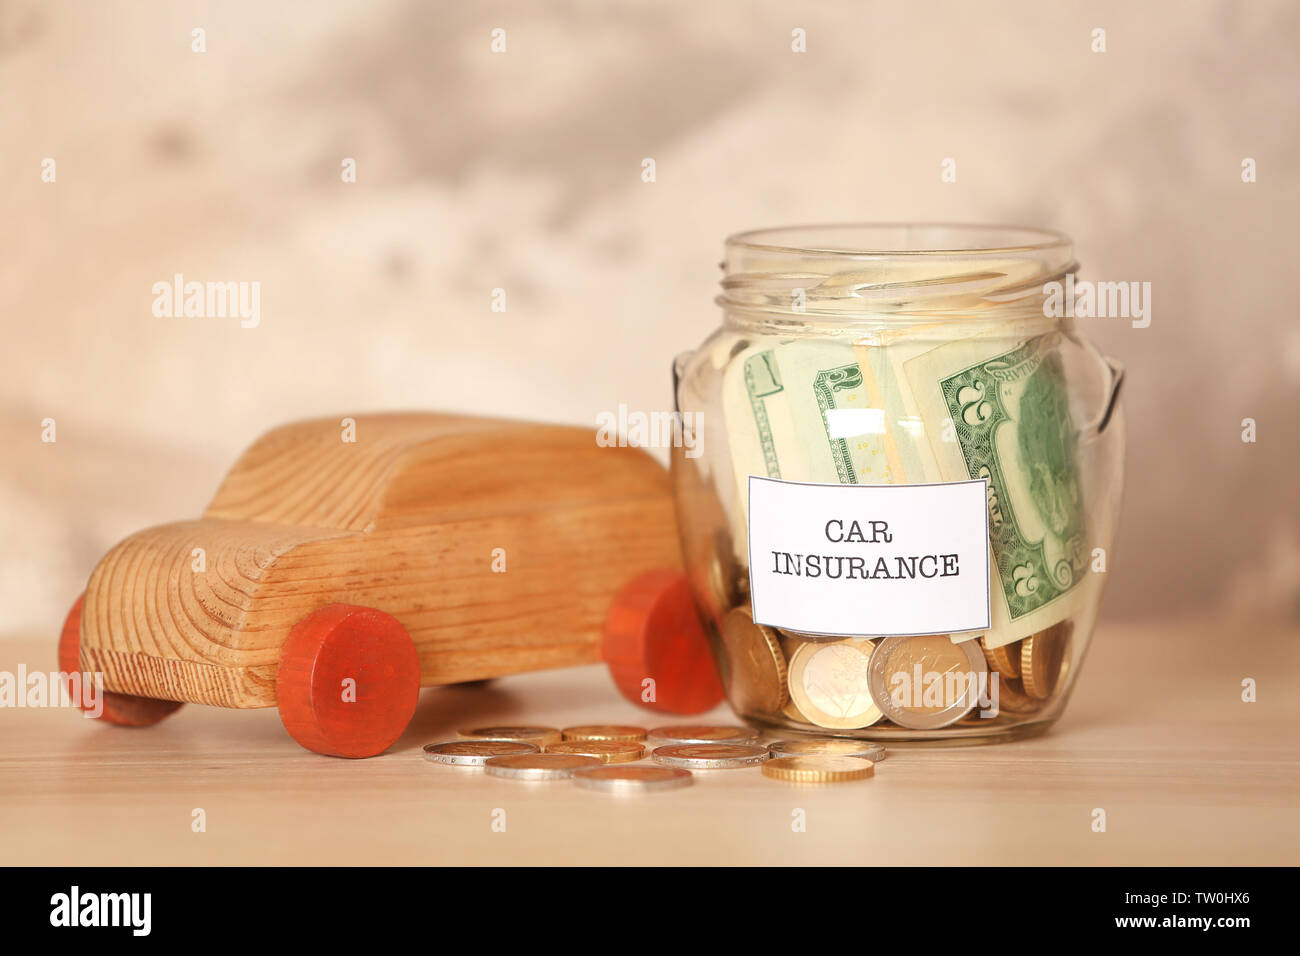 Glass jar with money and wooden car toy on table Stock Photo